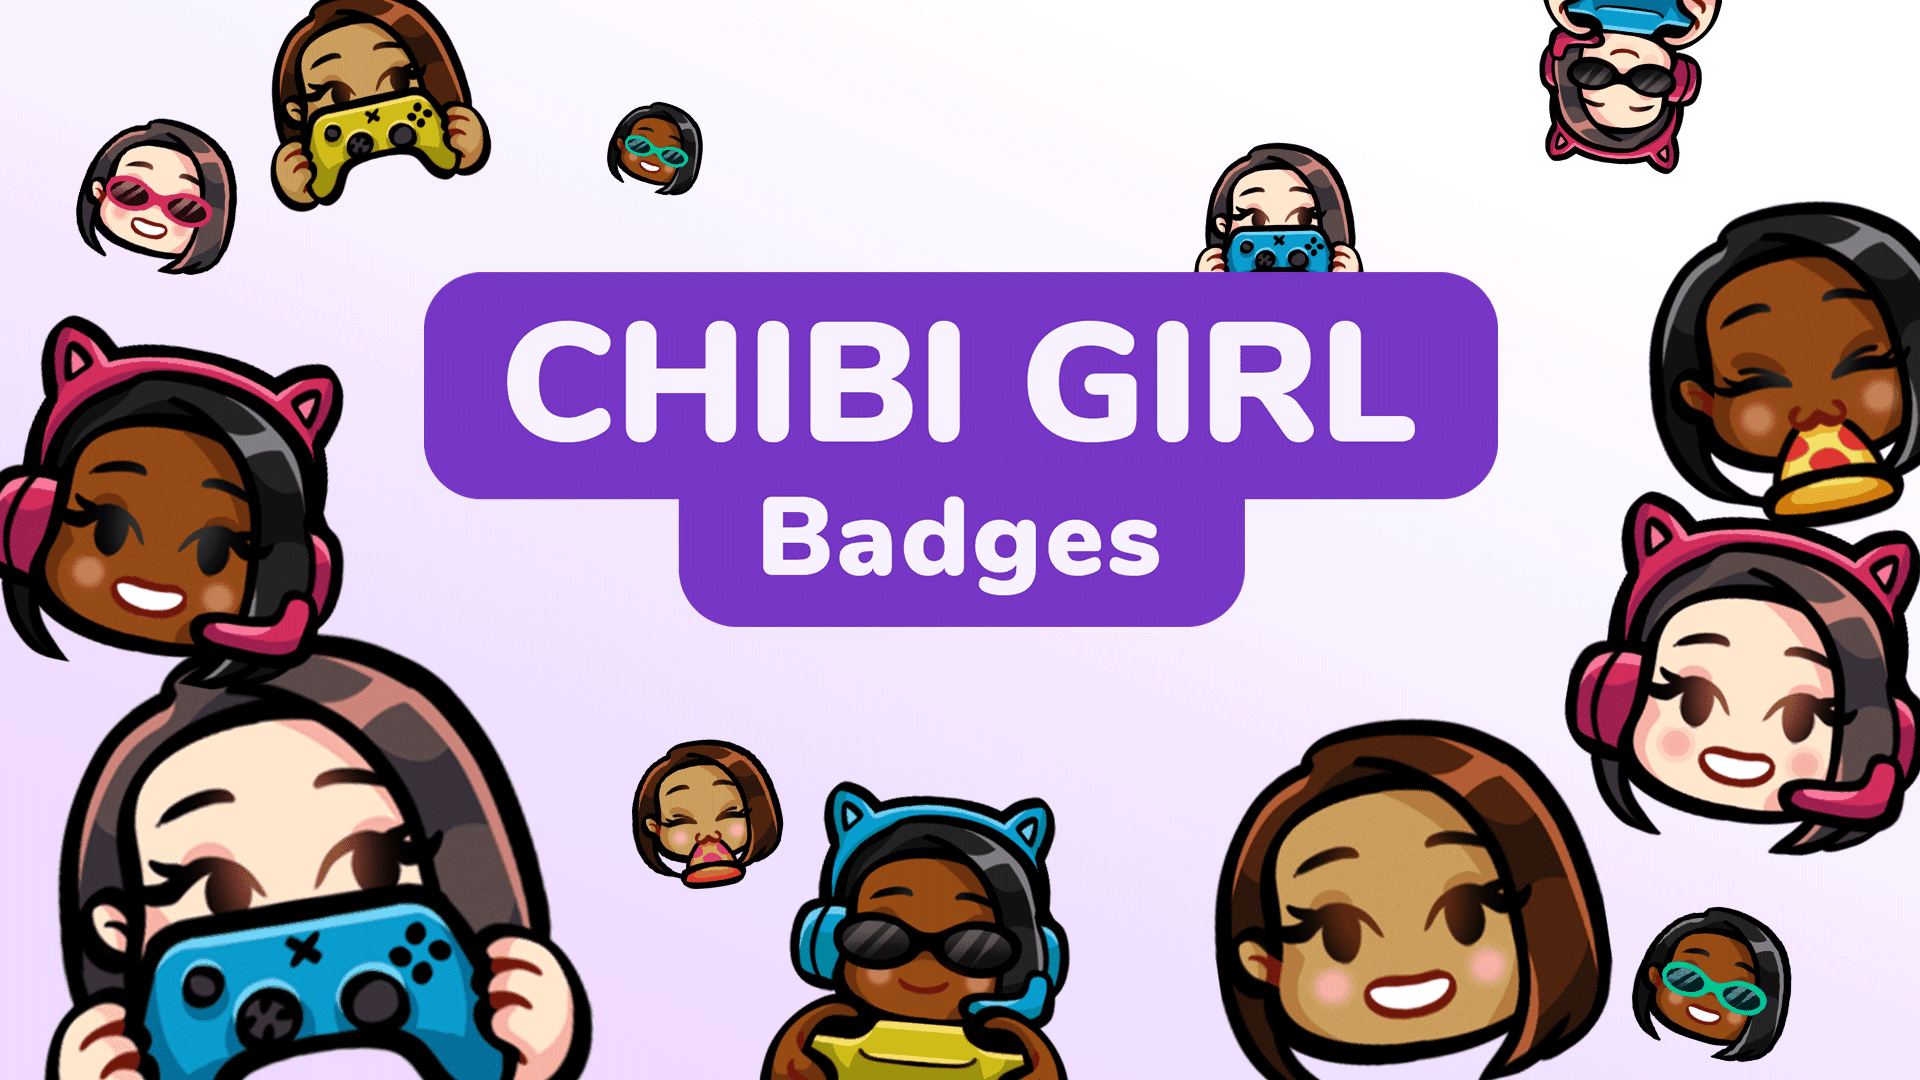 Chibi Girl Custom Badges for Twitch, Youtube and Discord